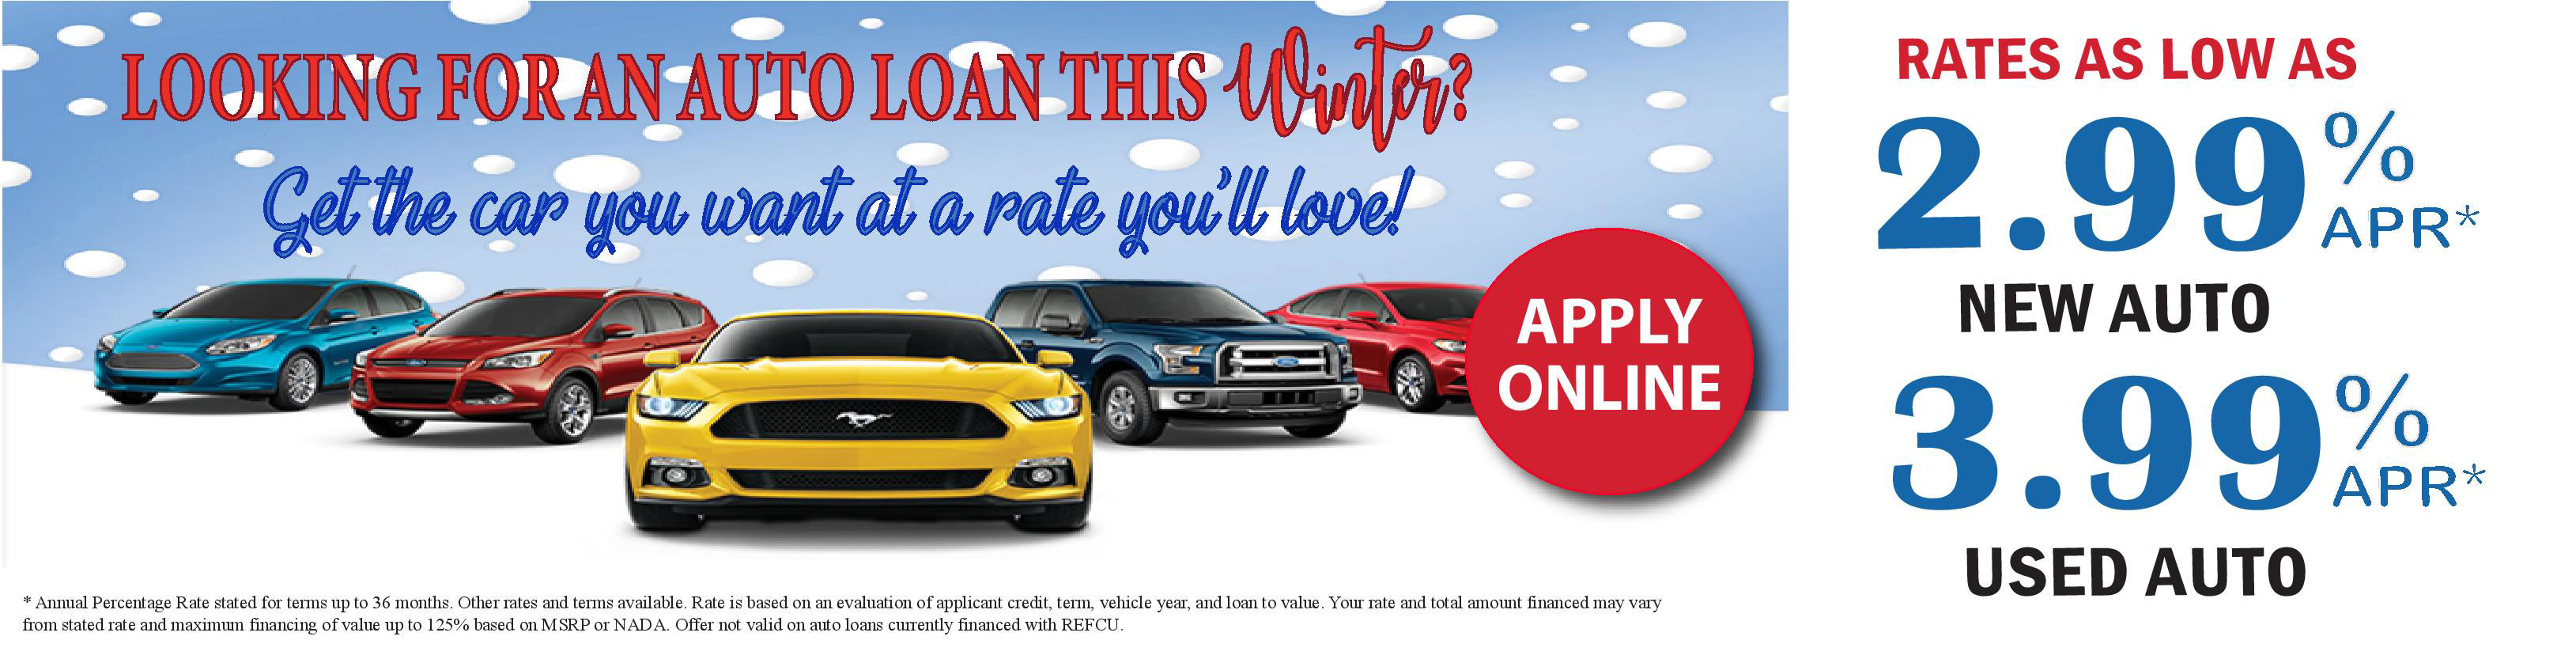 Get the car you want at a rate you'll love as low as 2.99% APR